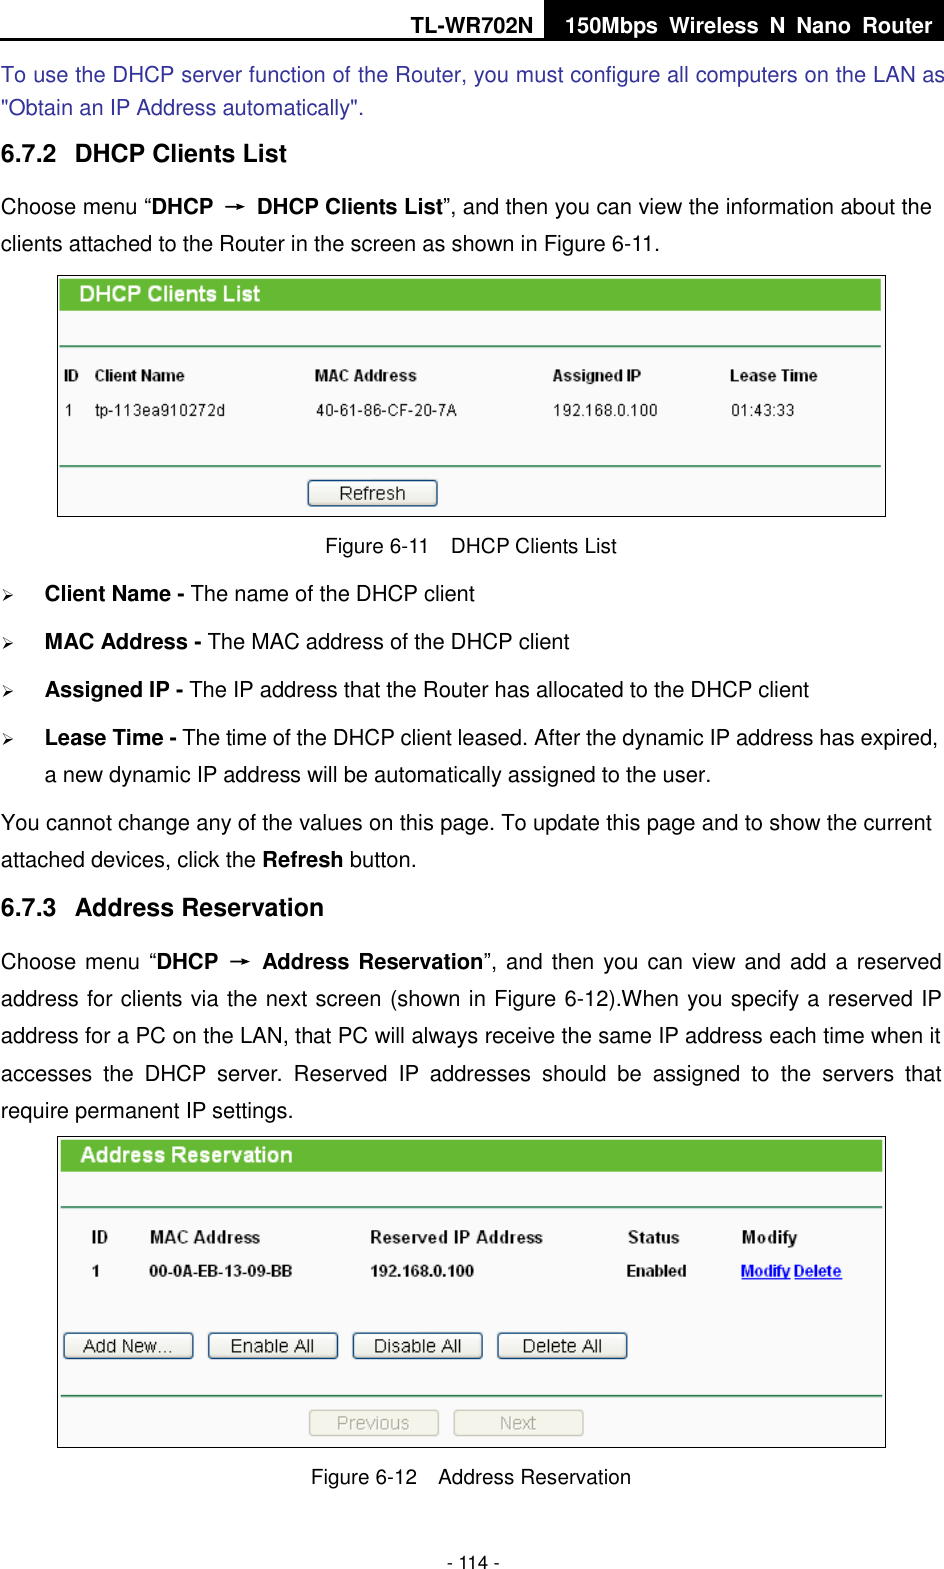 TL-WR702N 150Mbps  Wireless  N  Nano  Router  - 114 - To use the DHCP server function of the Router, you must configure all computers on the LAN as &quot;Obtain an IP Address automatically&quot;. 6.7.2  DHCP Clients List Choose menu “DHCP  →  DHCP Clients List”, and then you can view the information about the clients attached to the Router in the screen as shown in Figure 6-11.  Figure 6-11  DHCP Clients List  Client Name - The name of the DHCP client    MAC Address - The MAC address of the DHCP client    Assigned IP - The IP address that the Router has allocated to the DHCP client  Lease Time - The time of the DHCP client leased. After the dynamic IP address has expired, a new dynamic IP address will be automatically assigned to the user.     You cannot change any of the values on this page. To update this page and to show the current attached devices, click the Refresh button. 6.7.3  Address Reservation Choose menu “DHCP  →  Address Reservation”, and then you can view and add a reserved address for clients via the next screen (shown in Figure 6-12).When you specify a reserved IP address for a PC on the LAN, that PC will always receive the same IP address each time when it accesses  the  DHCP  server.  Reserved  IP  addresses  should  be  assigned  to  the  servers  that require permanent IP settings.    Figure 6-12  Address Reservation 